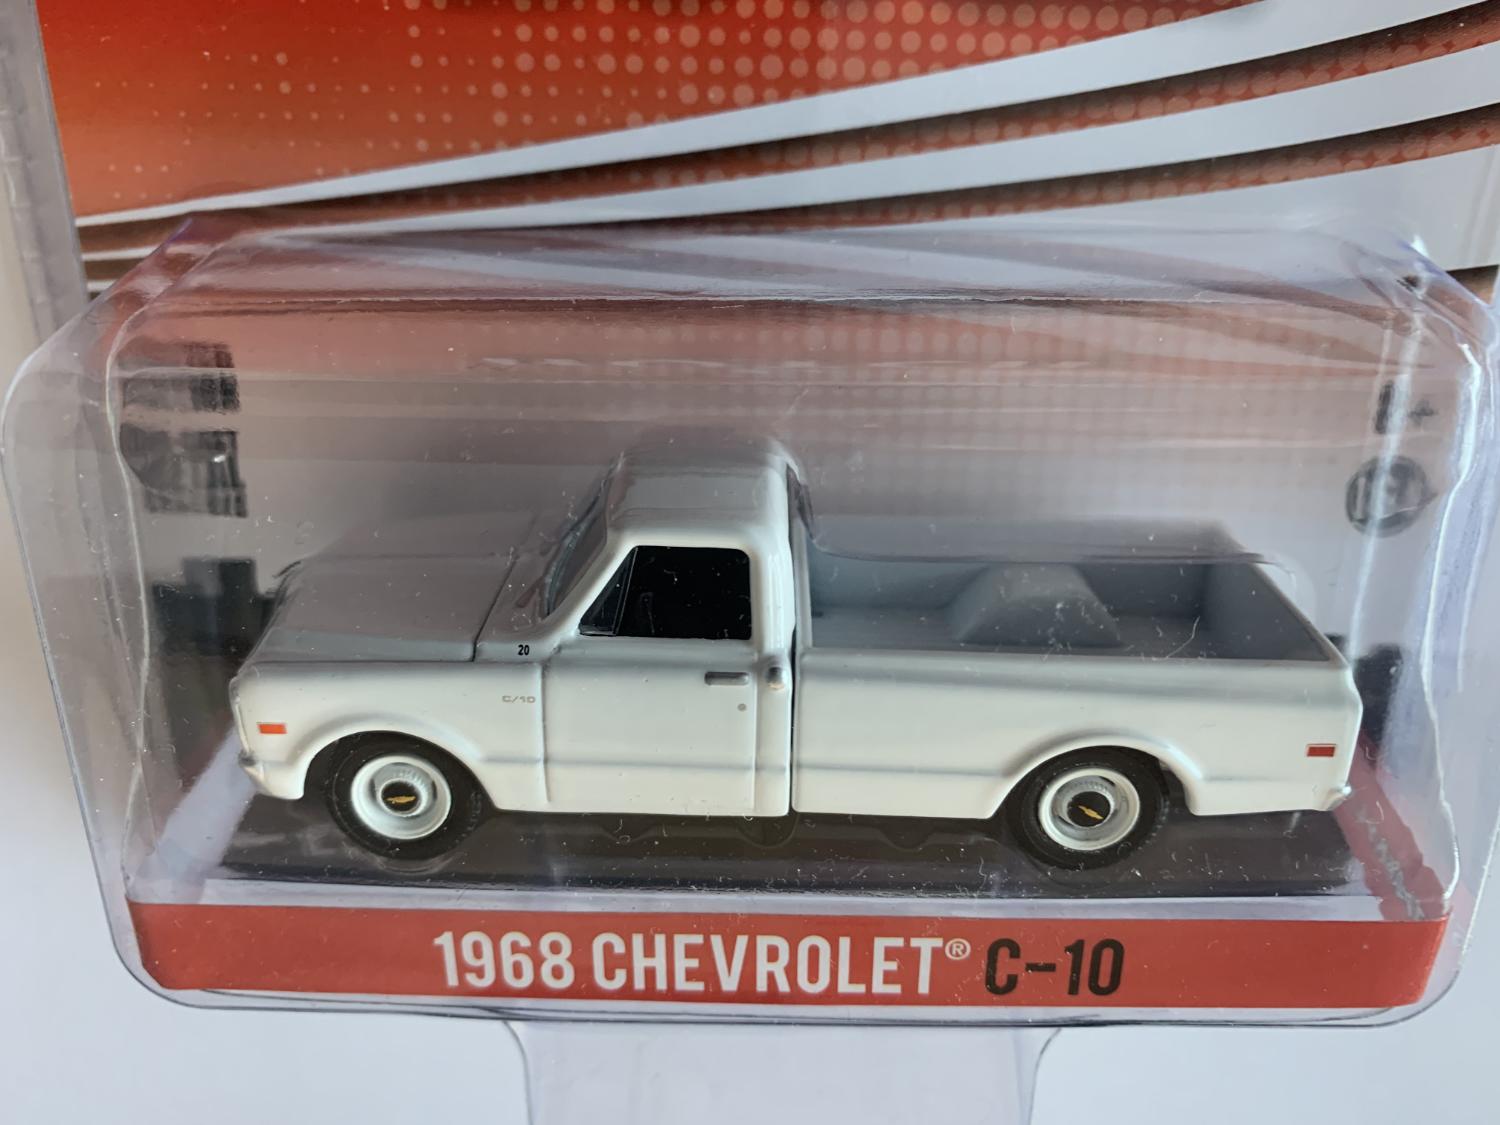 Starsky & Hutch 1968 Chevrolet C-10 in white 1:64 scale model from Greenlight, limited edition model